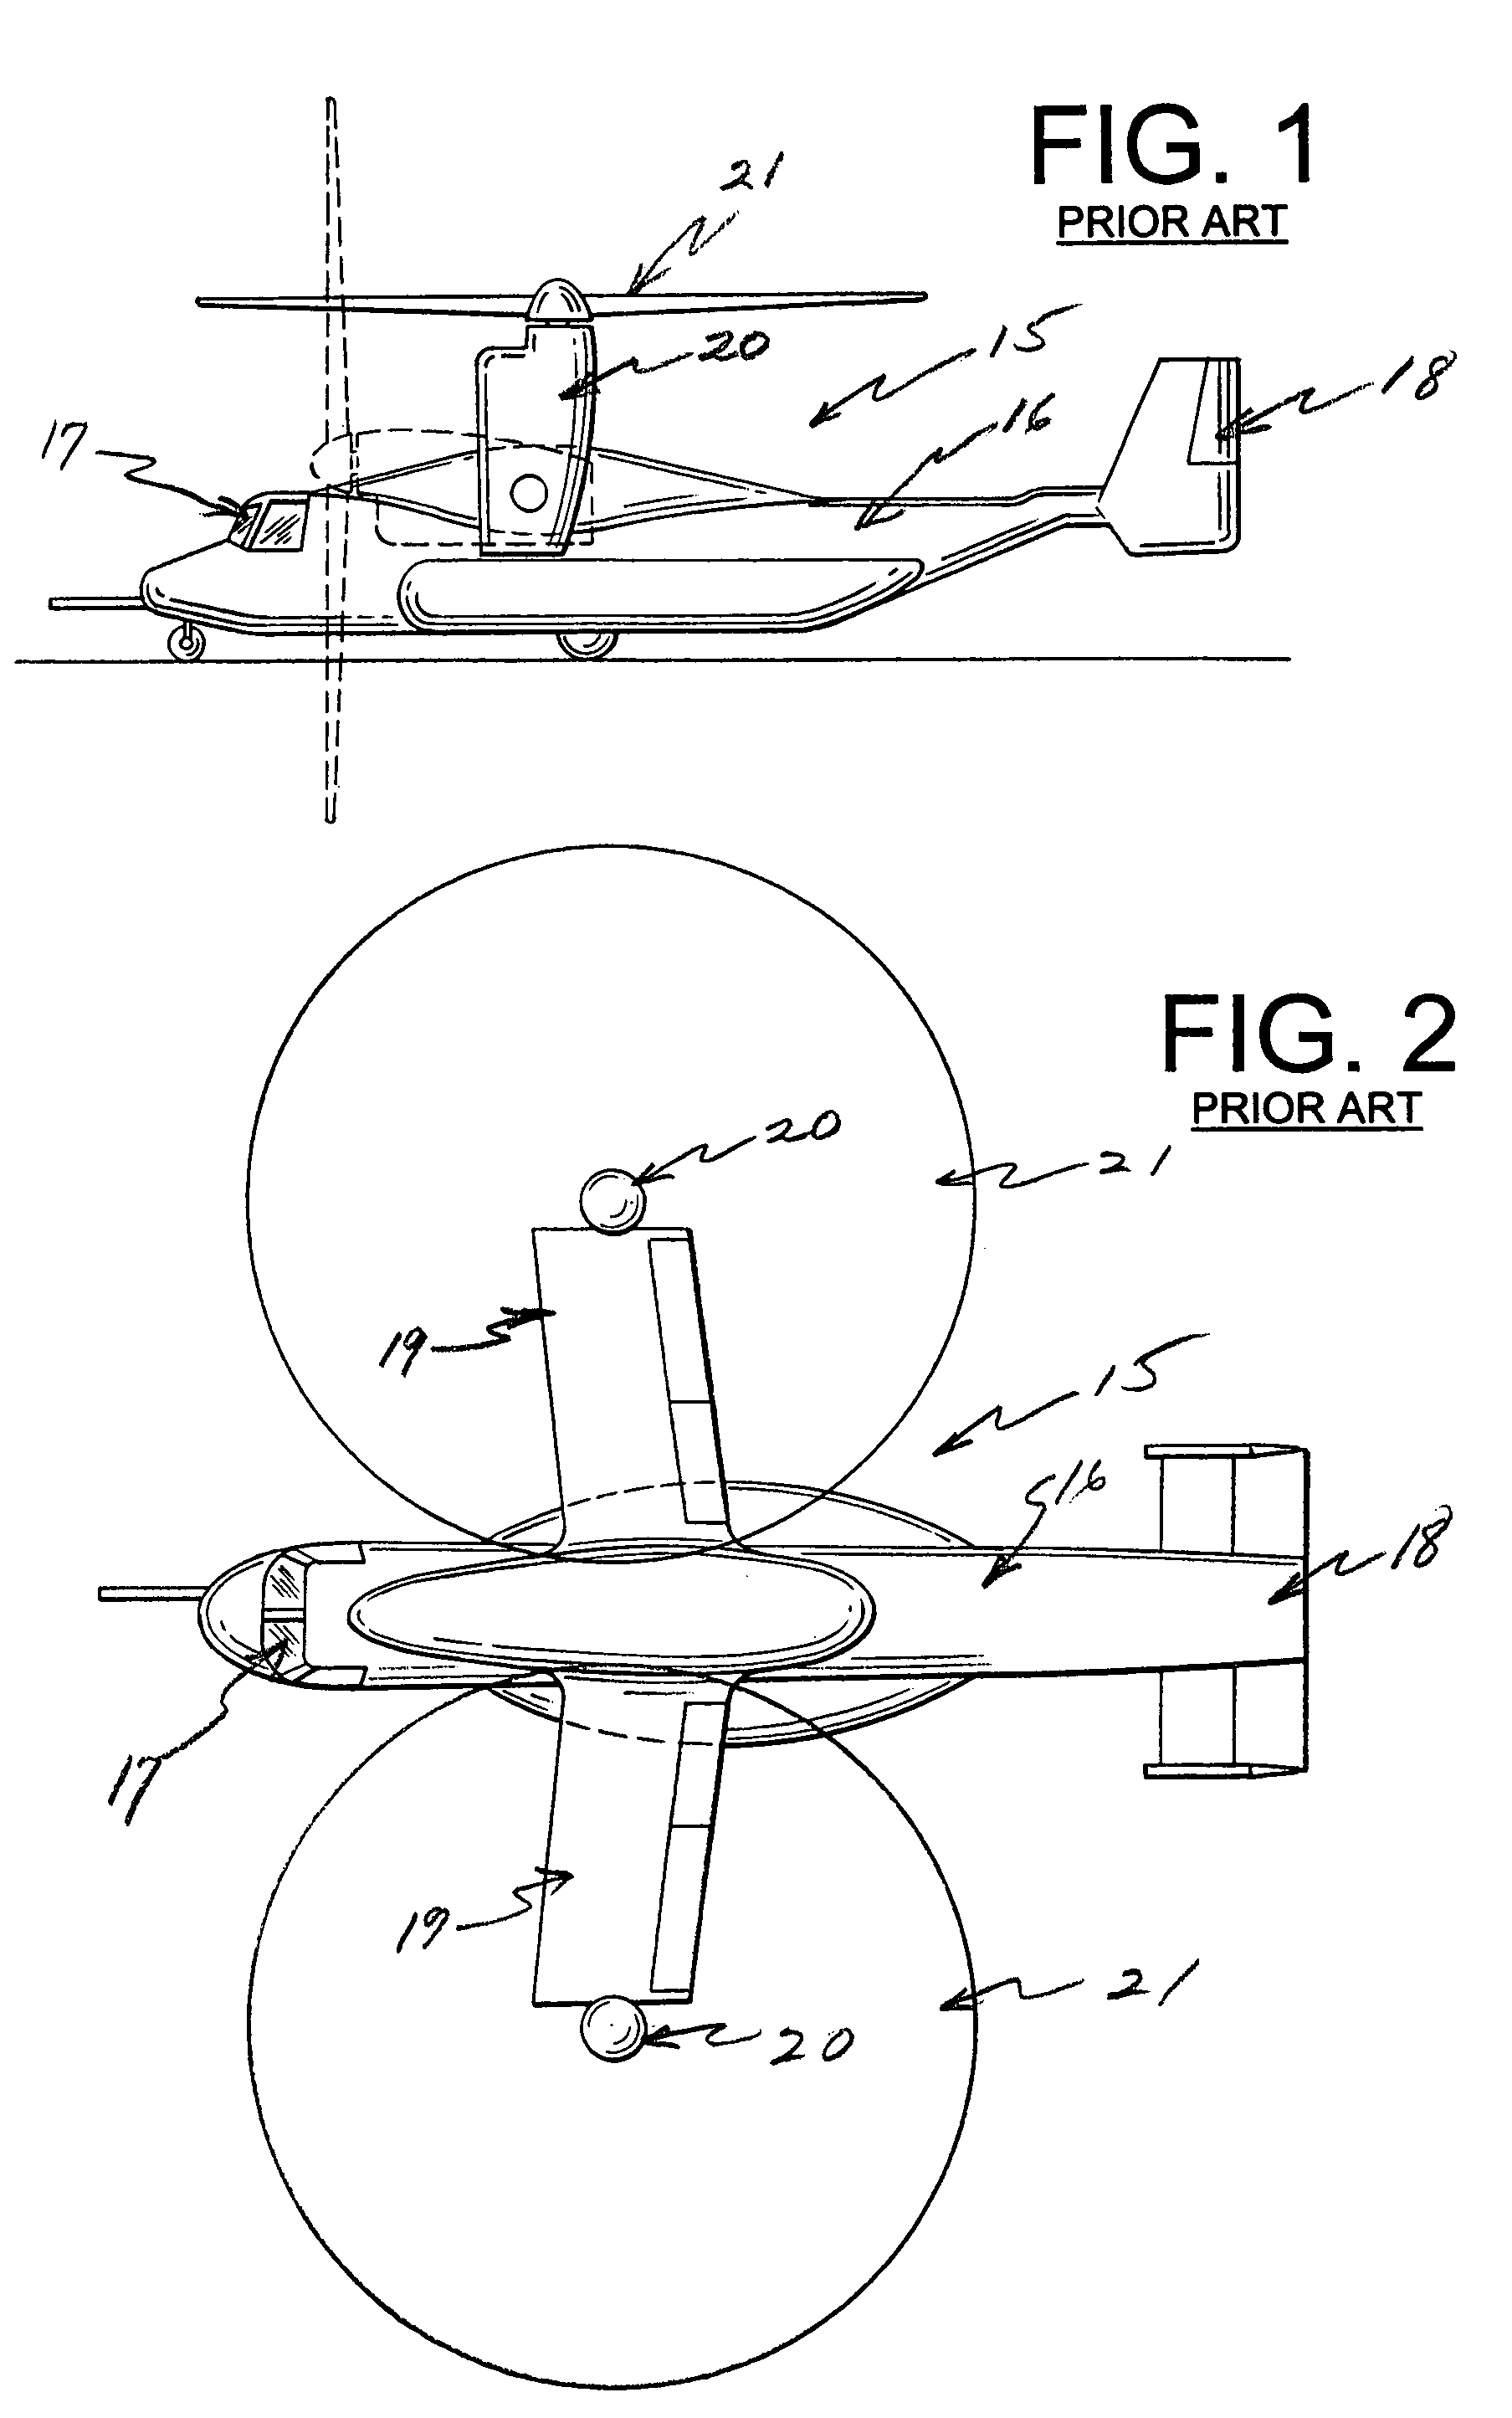 Vertical takeoff and landing aircraft